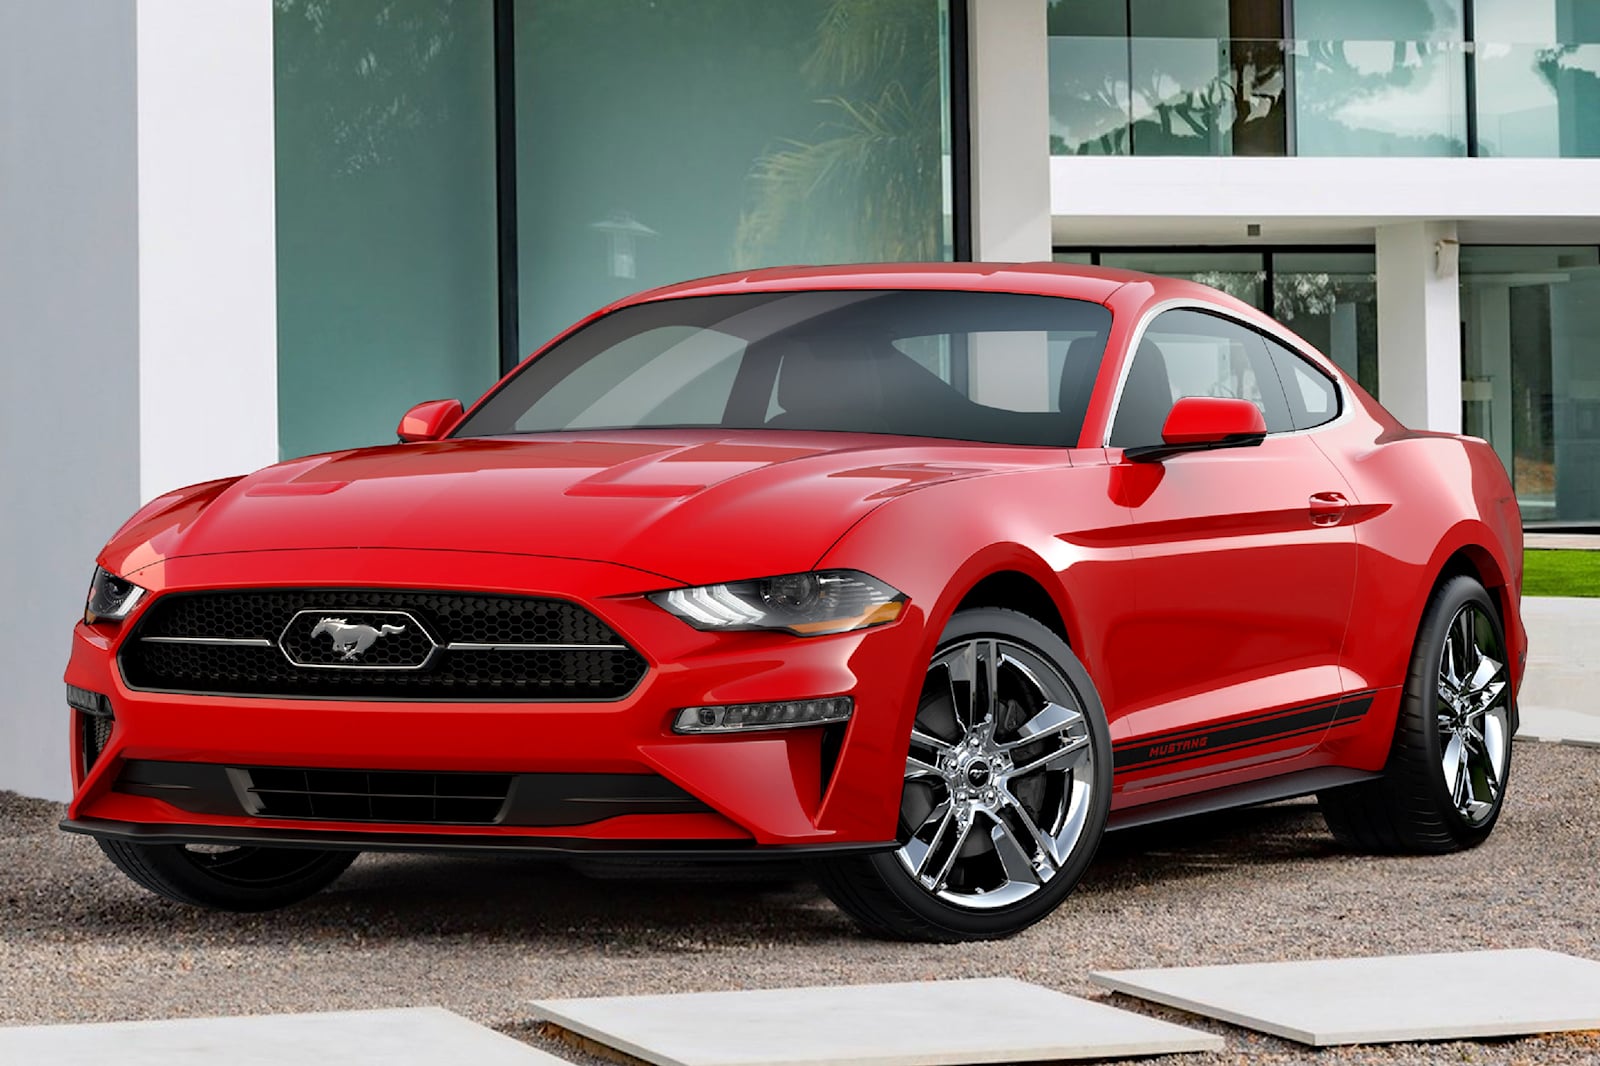 Mustang and Corvette: The New Contenders in GT Competition